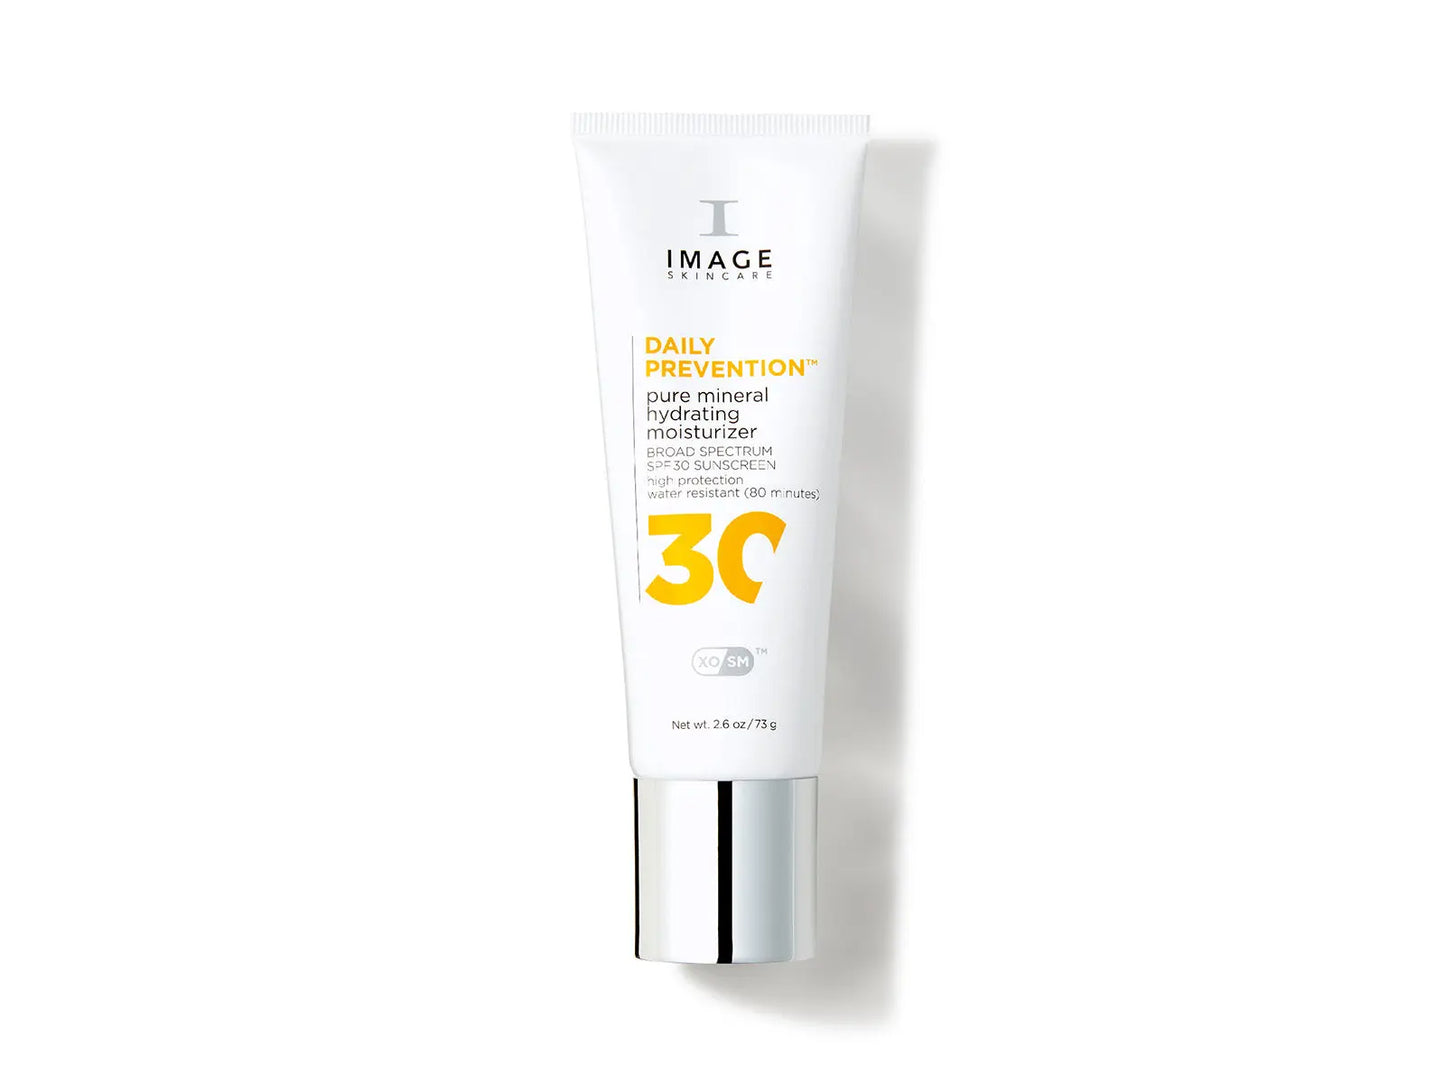 Daily Prevention - Pure Mineral Hydrating Moisturizer SPF 30 IMAGE